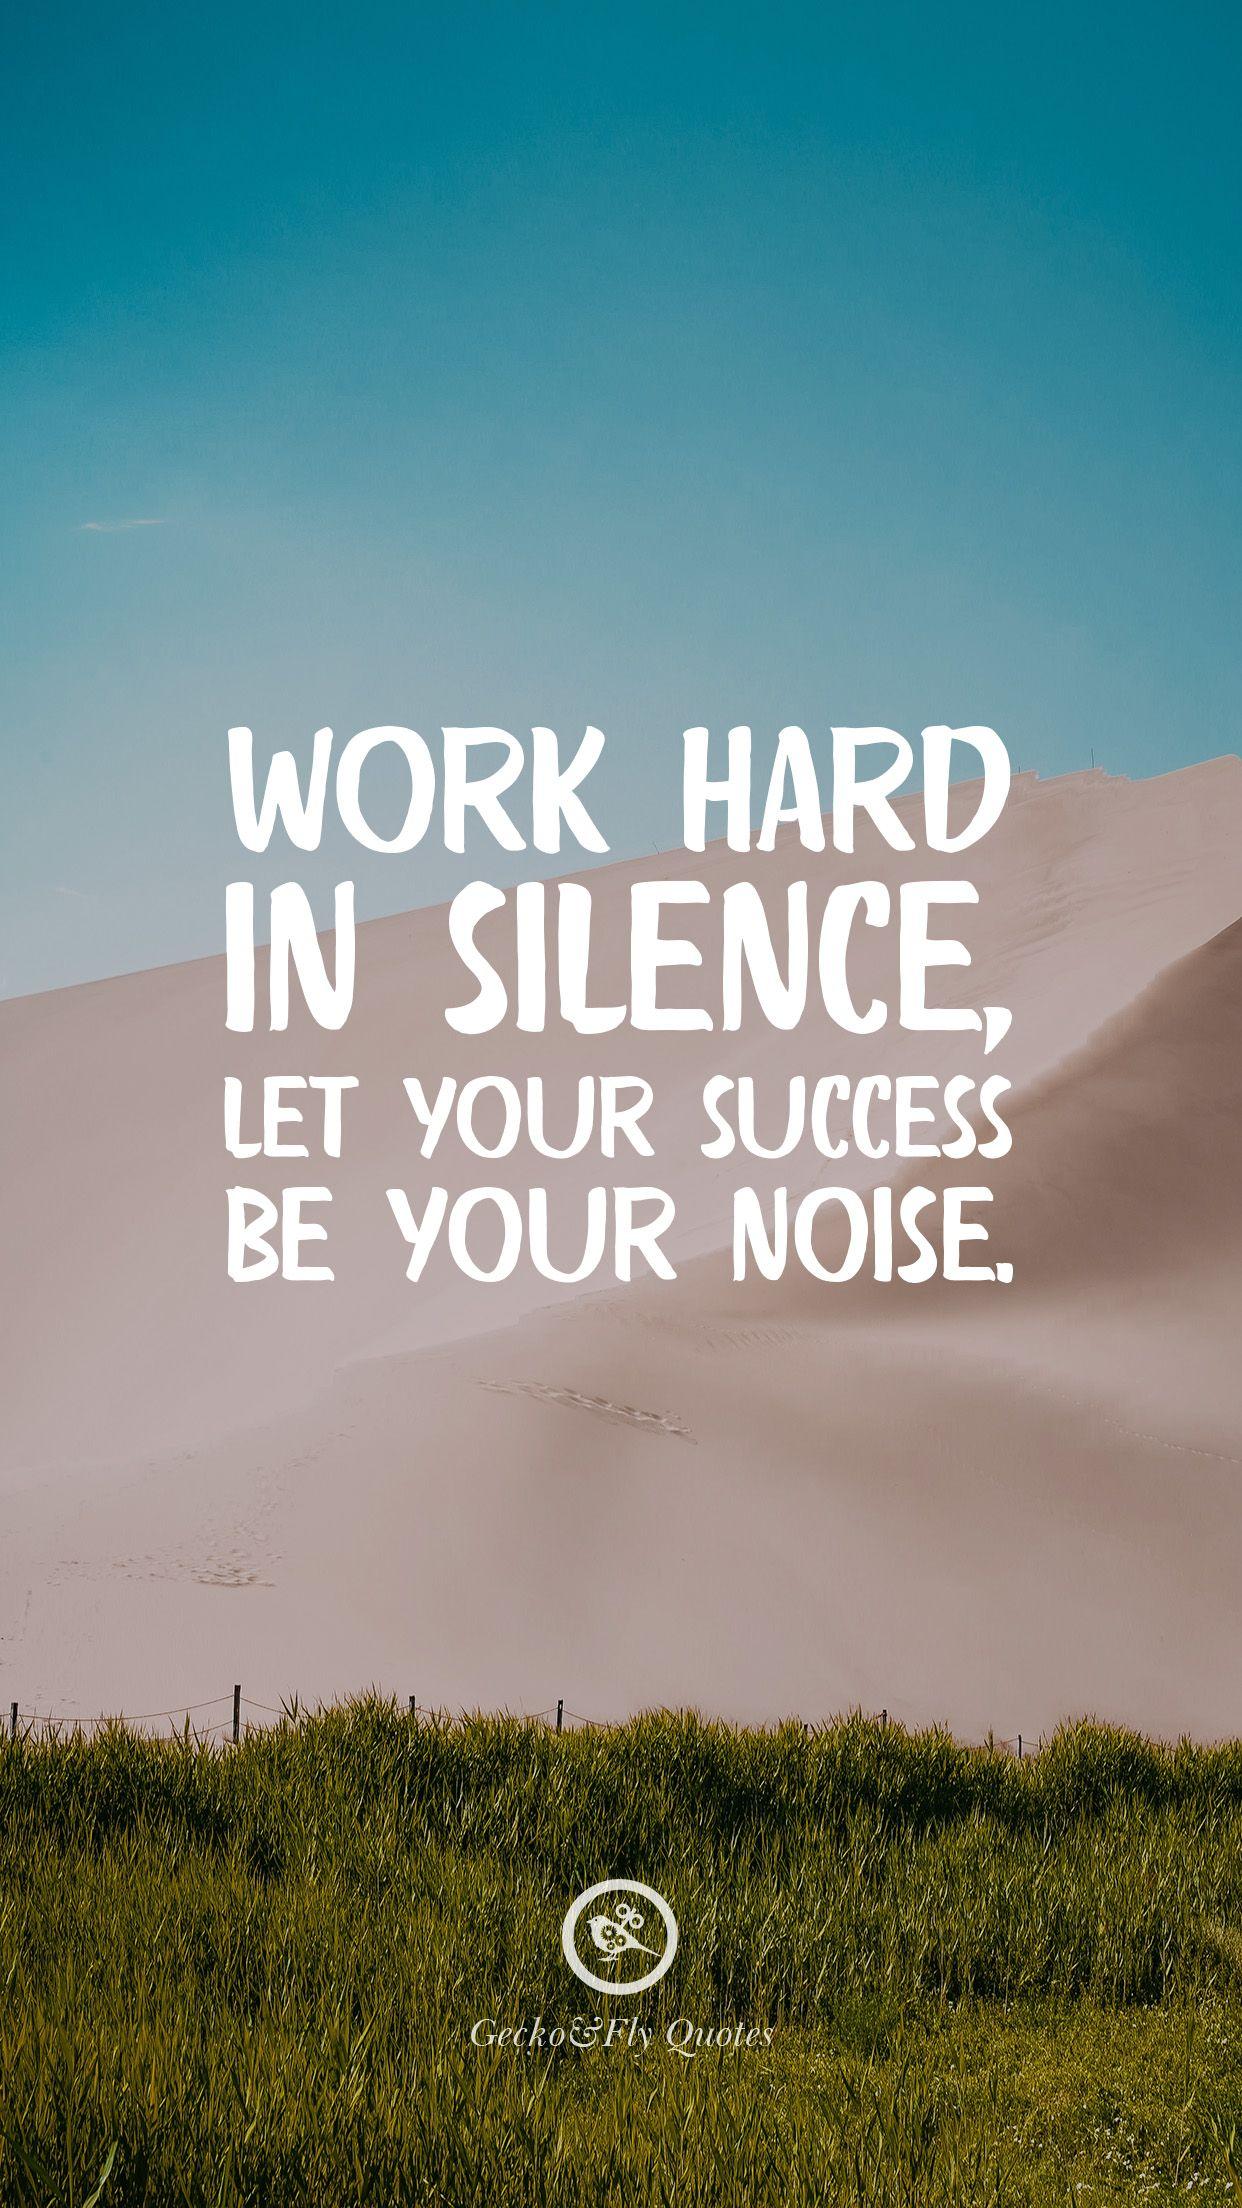 Work hard in silence, let your success be your noise. HD wallpaper quotes, Work in silence quotes, Work motivational quotes